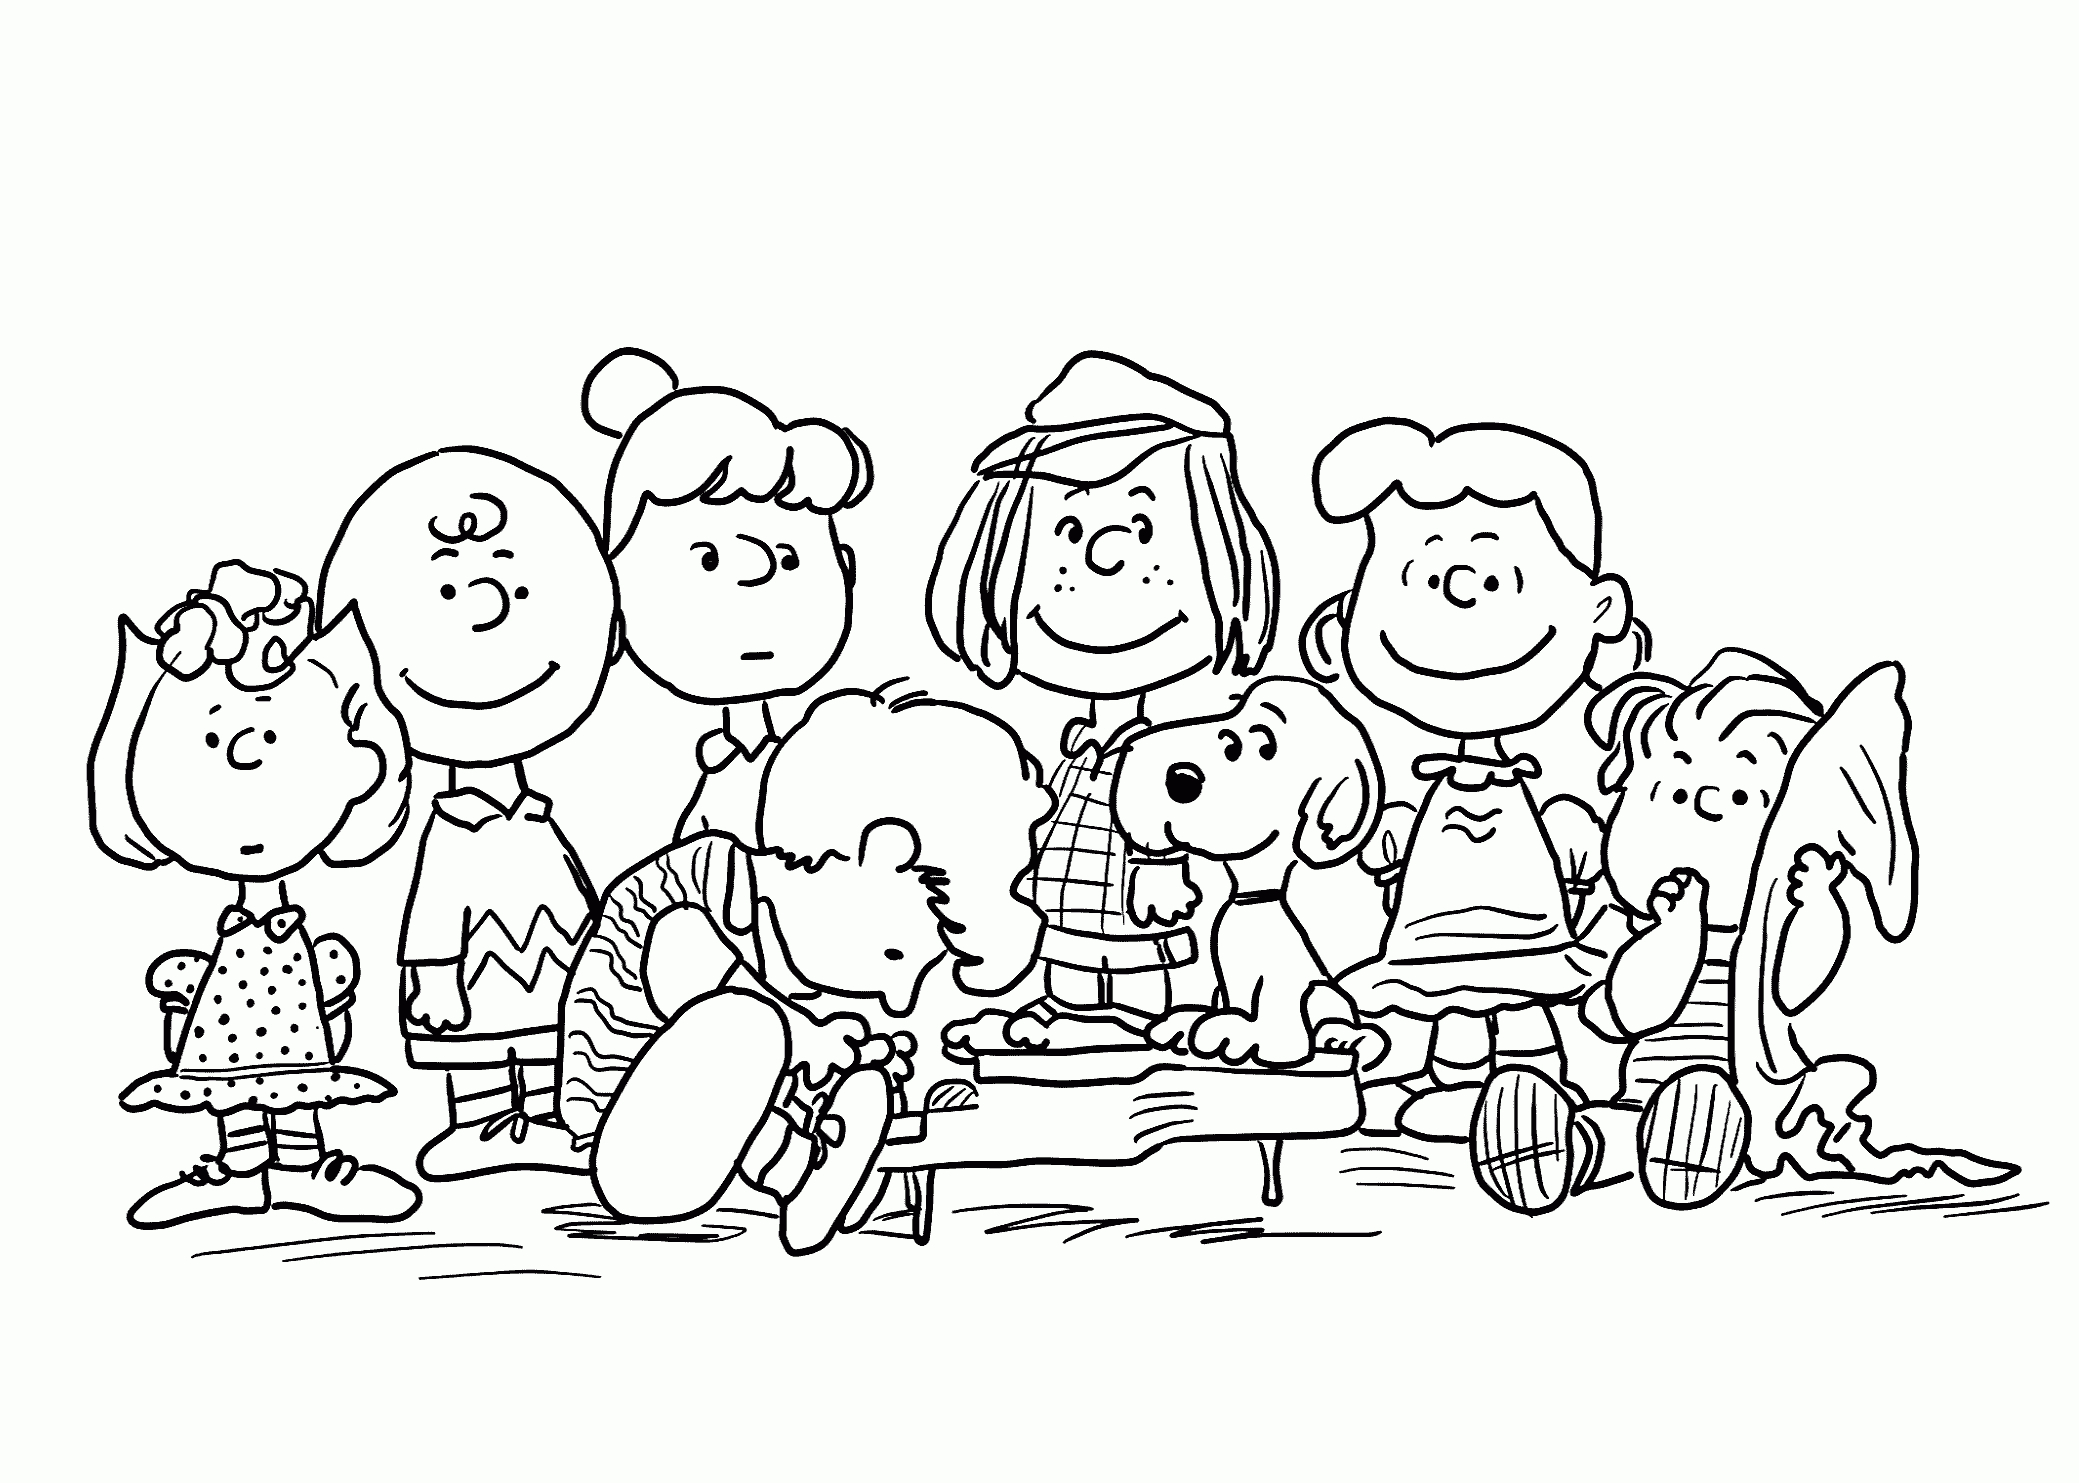 Charlie Brown And Friends Coloring Pages For Kids, Printable Free - Free Printable Charlie Brown Halloween Coloring Pages